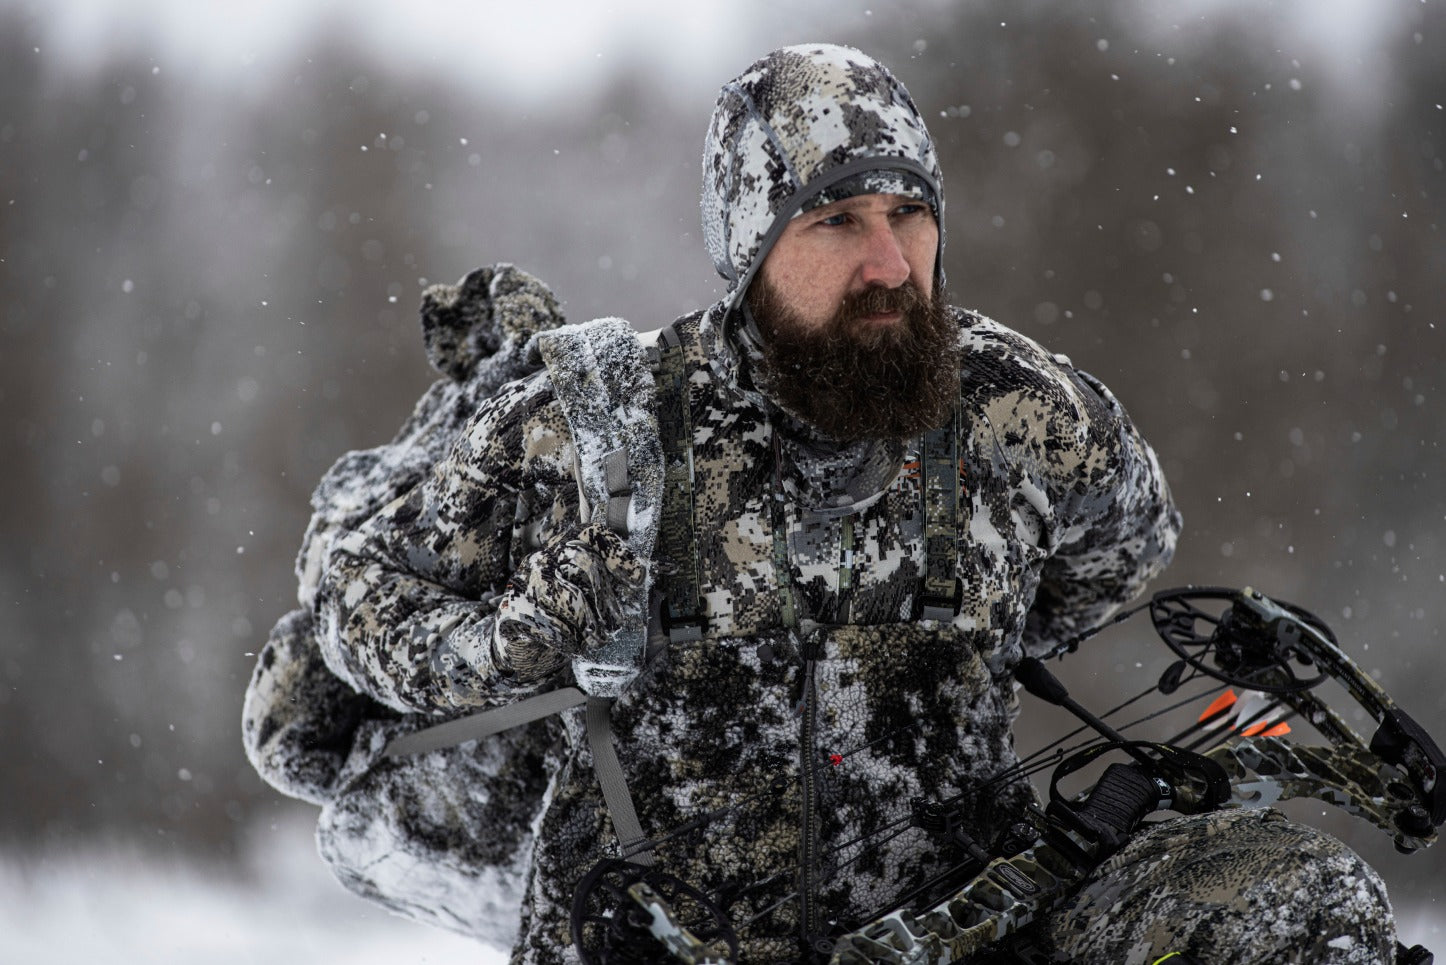 Buying Hunting Gloves? Here’s What You Should Look For